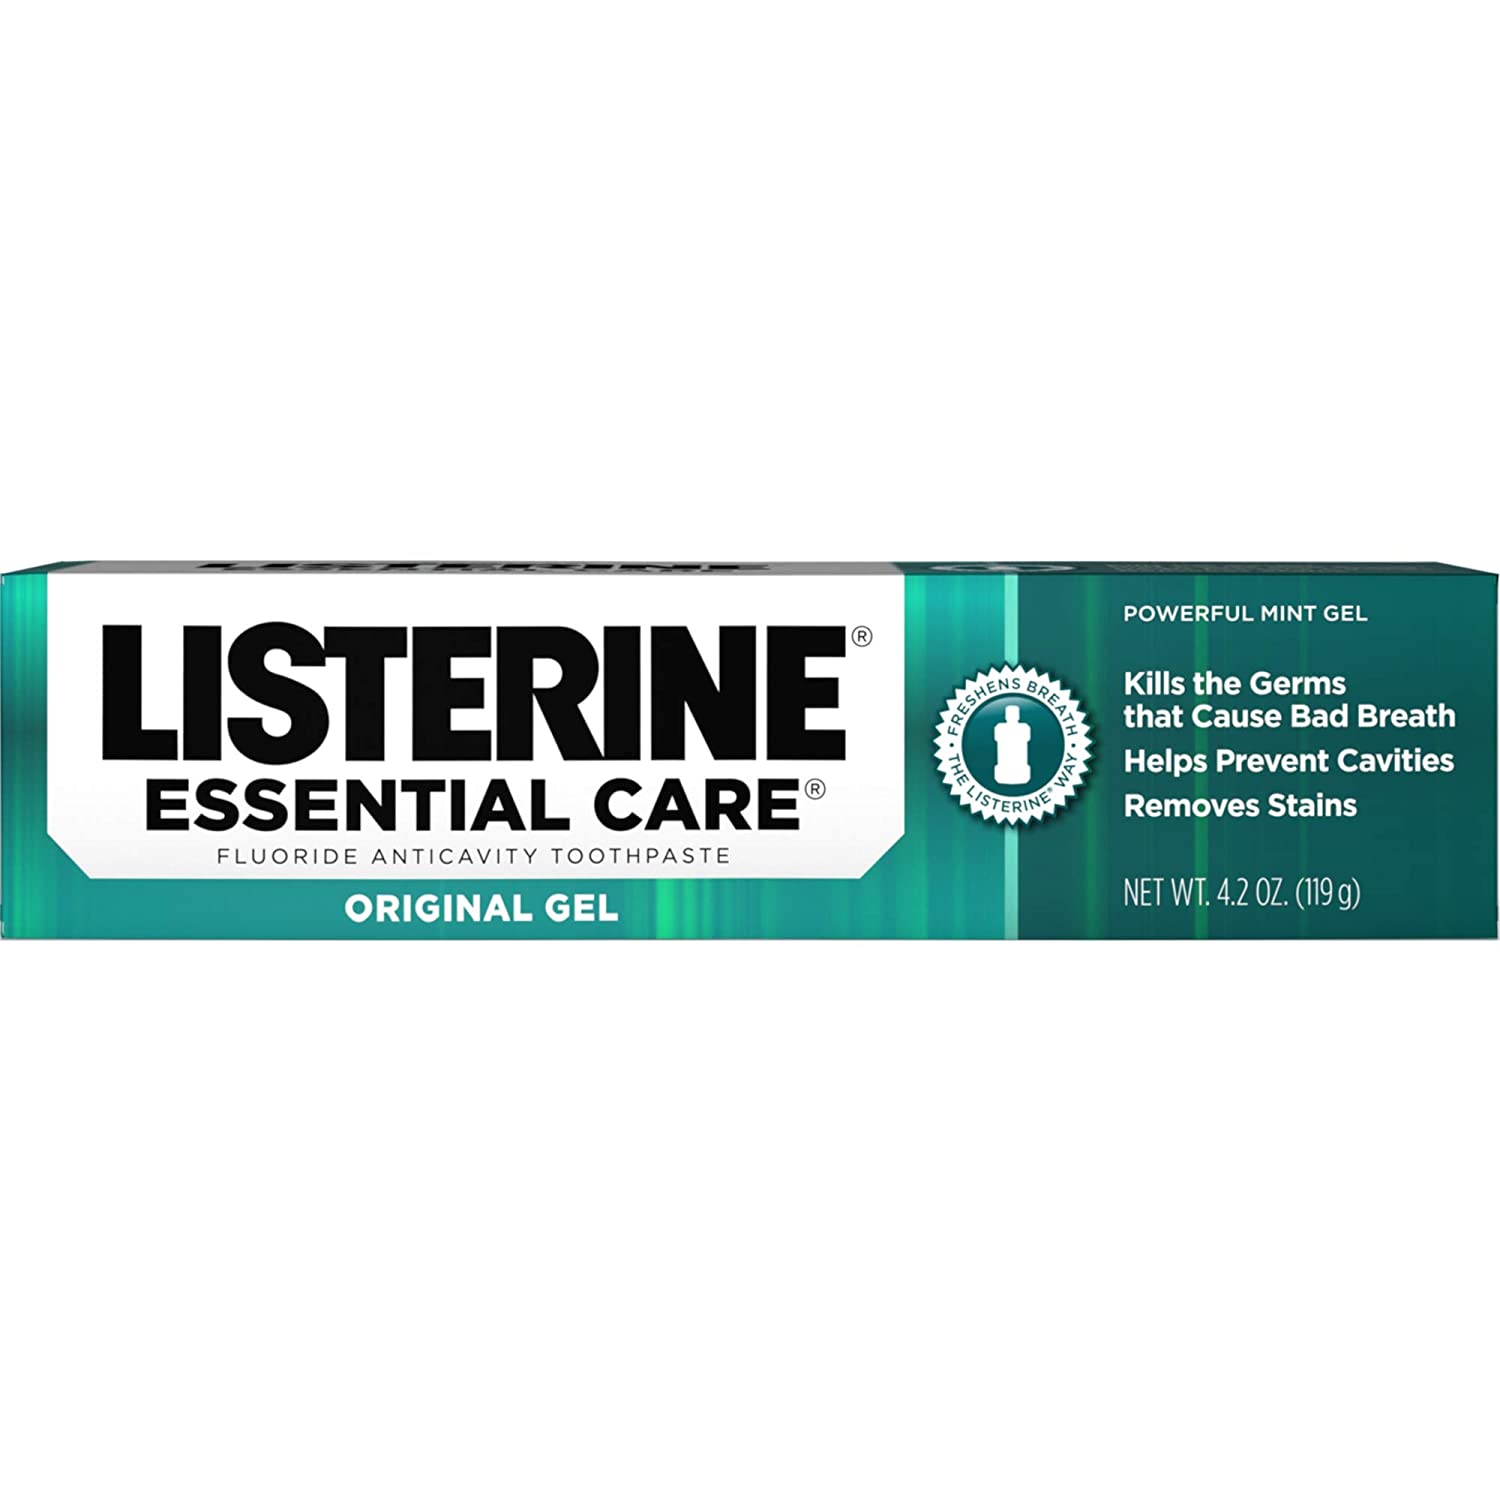 Listerine Essential Care Toothpaste Gel 4.20 oz (Pack of 2) - image 1 of 4